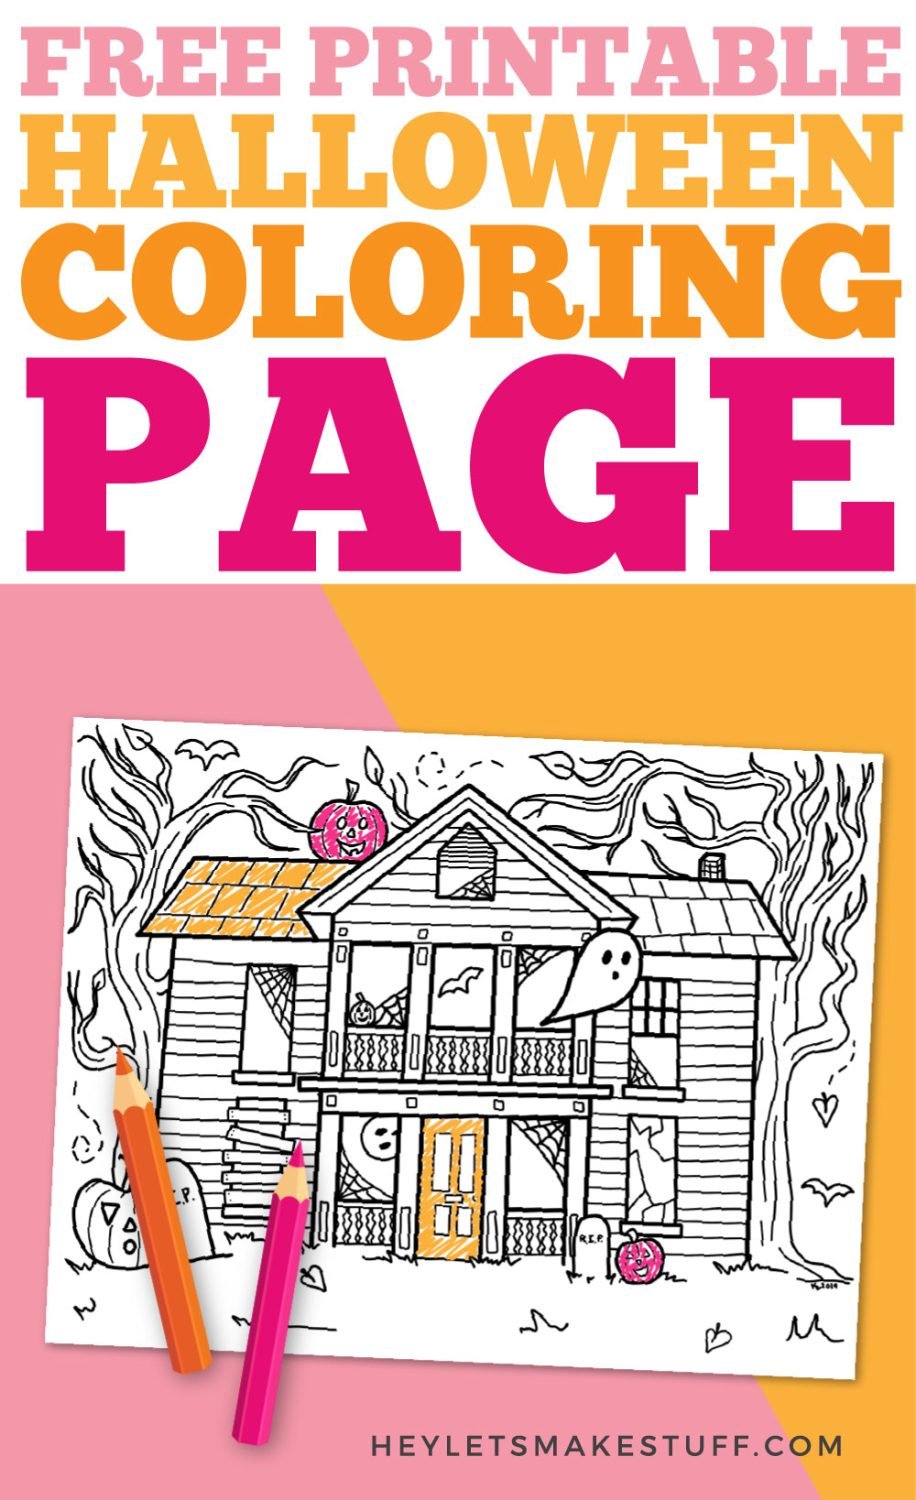 Halloween coloring page pin image